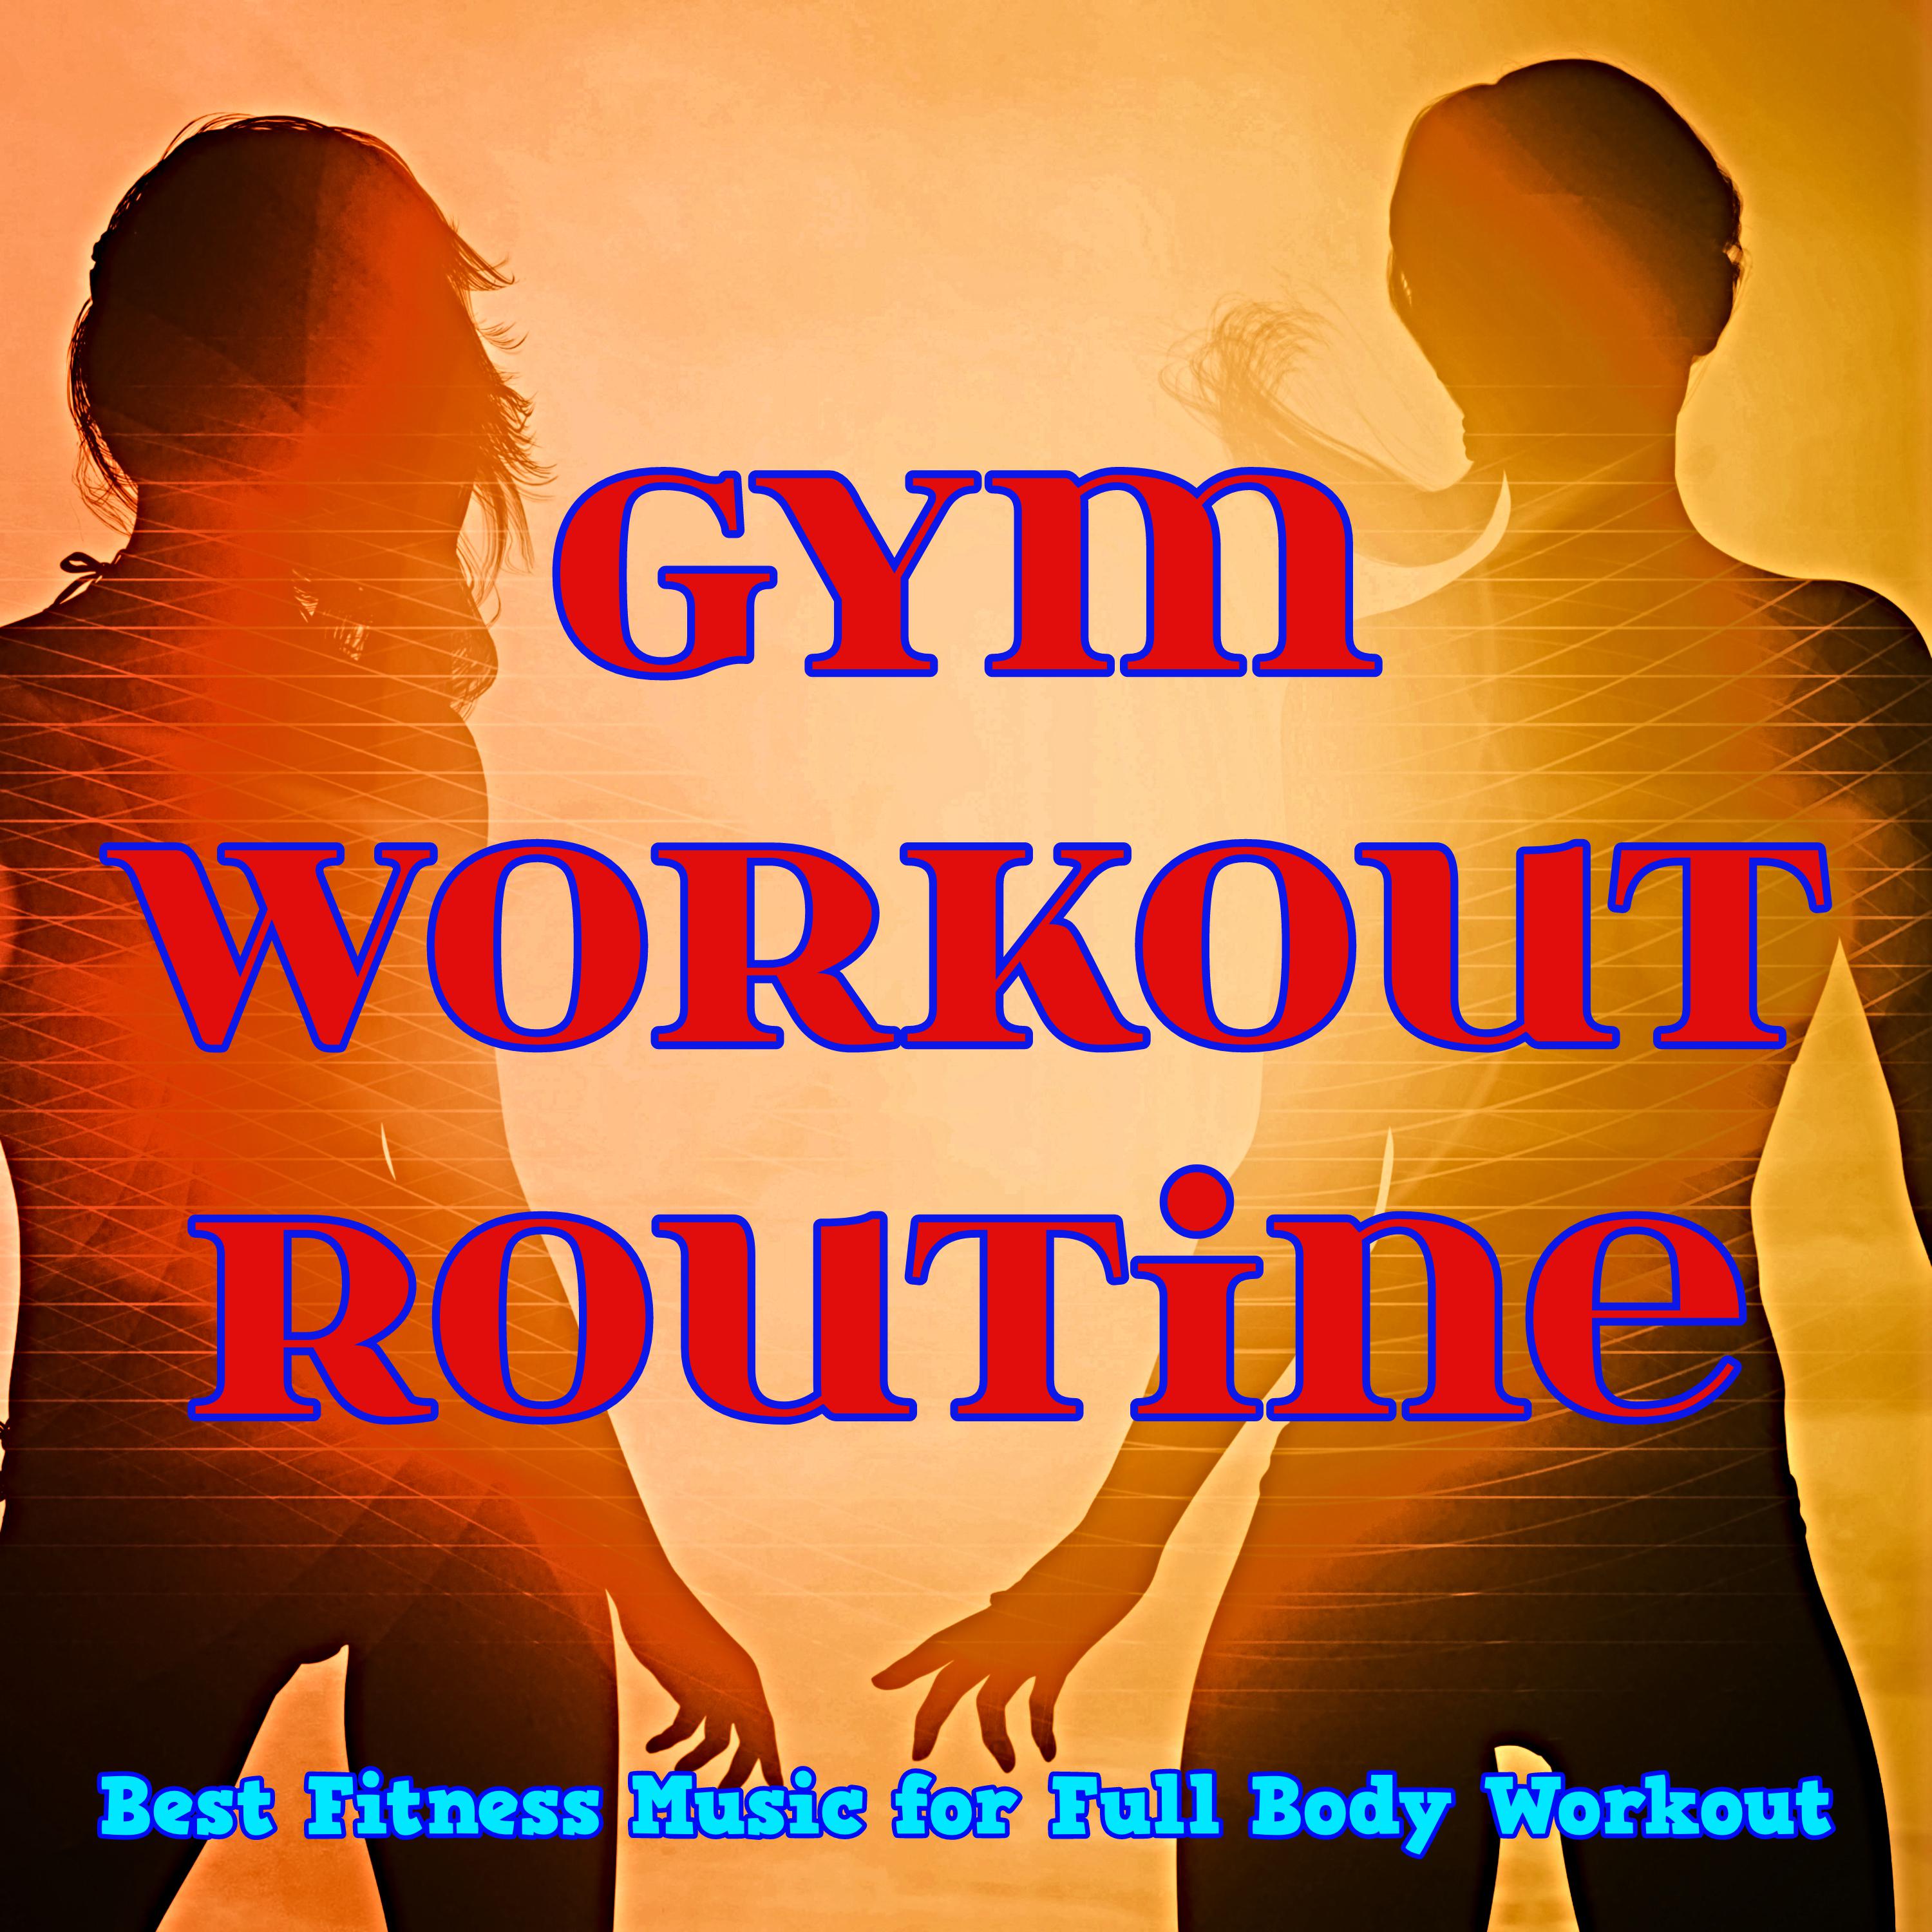 Gym Workout Routine  Best Fitness Music for Full Body Workout, Training Motivation Gym Slogans Electronic Songs